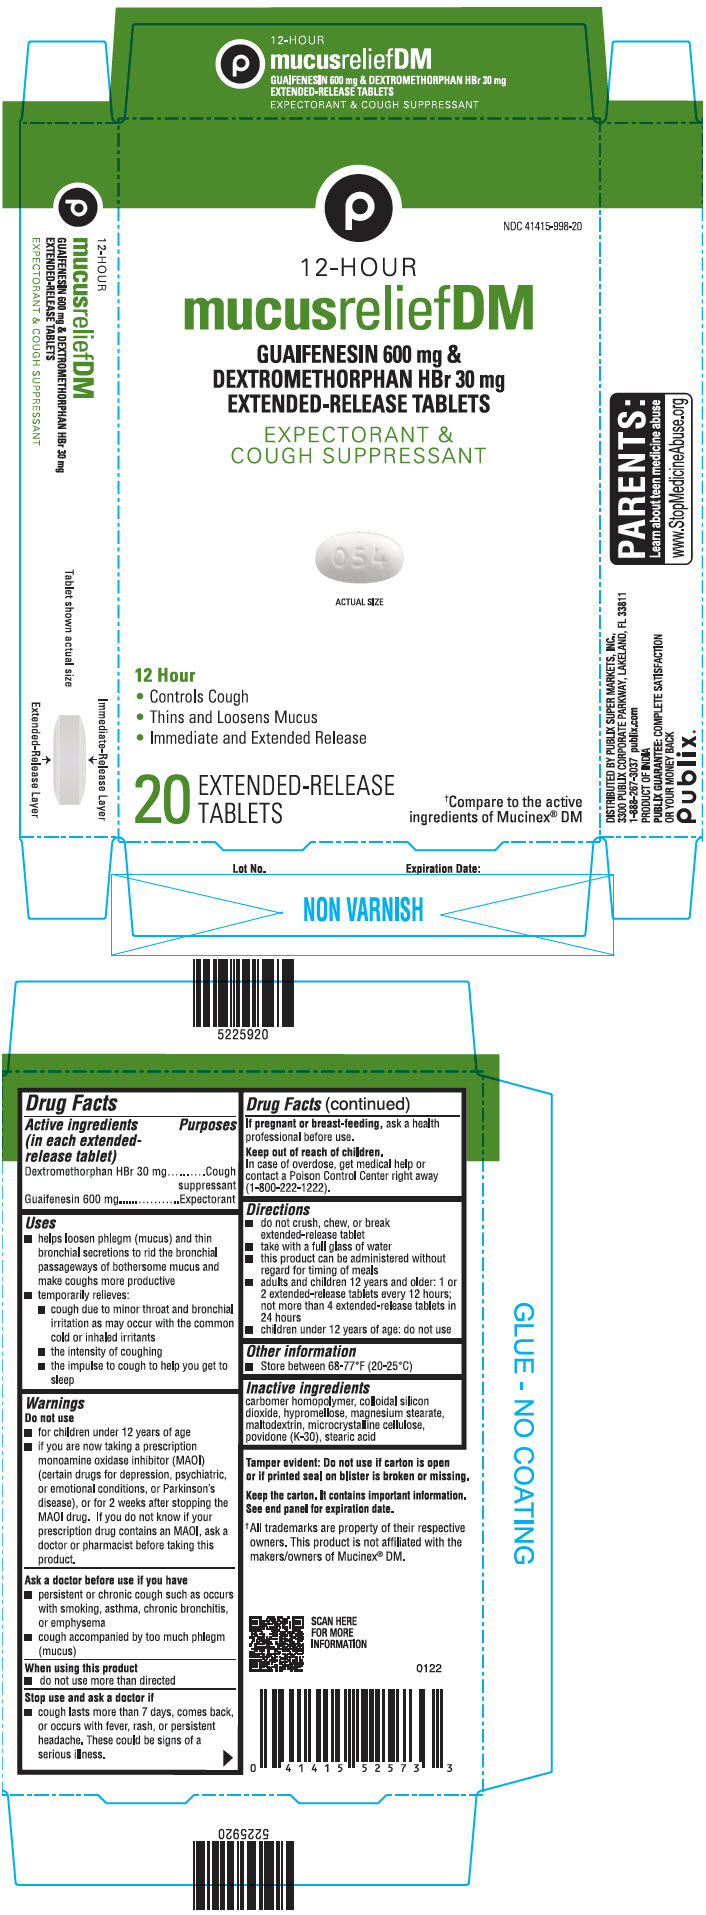 PRINCIPAL DISPLAY PANEL - 20 Extended-Release Tablet Blister Pack Carton